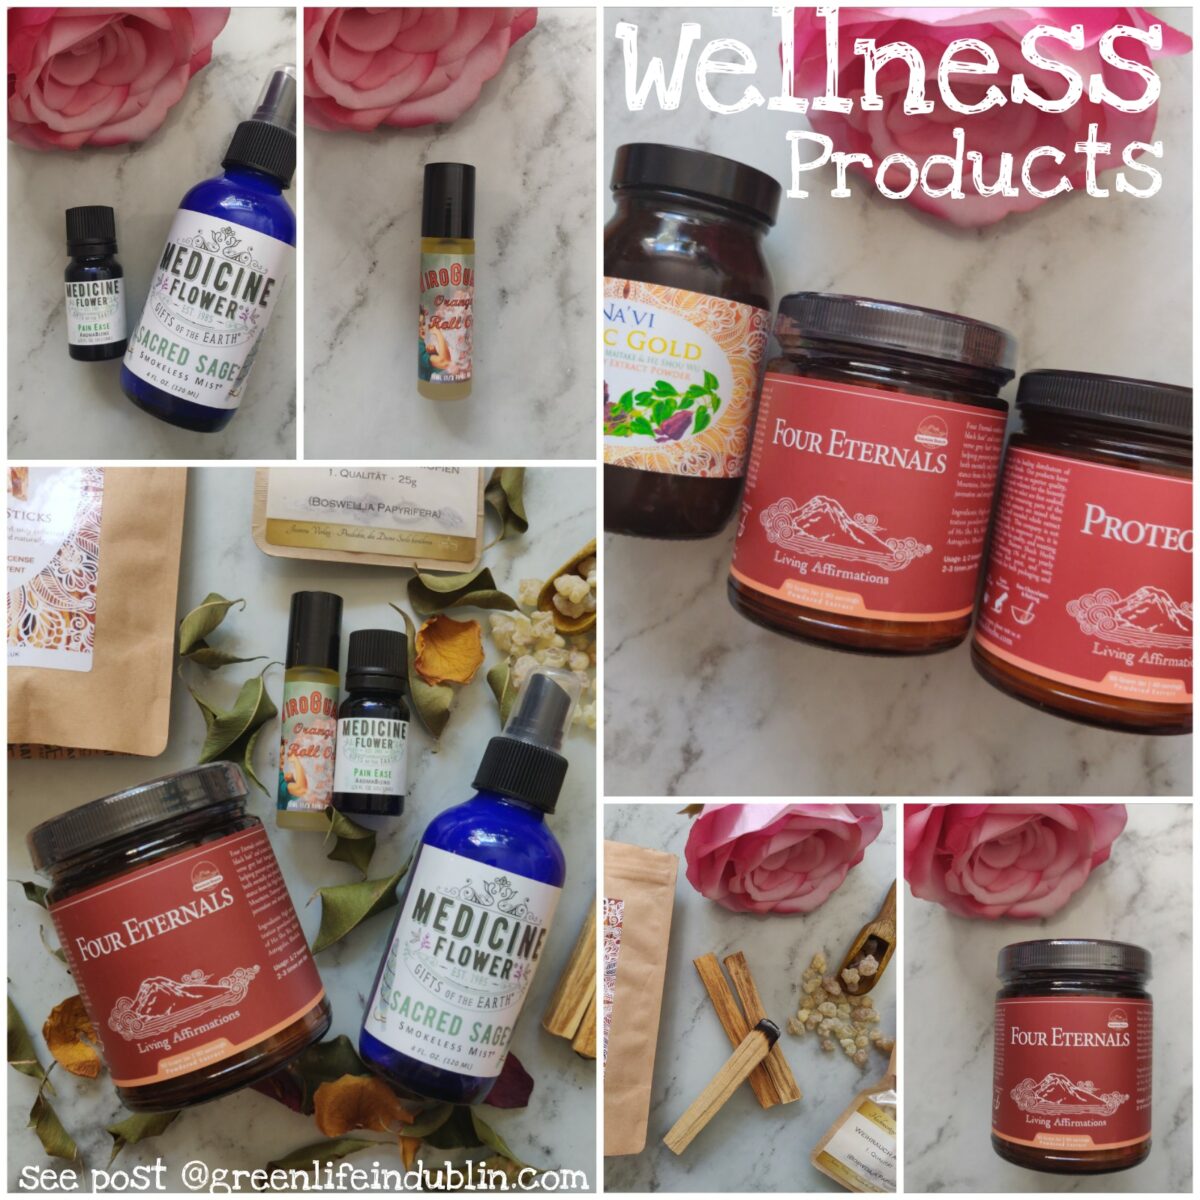 Wellness Products at The Dutch Health Store